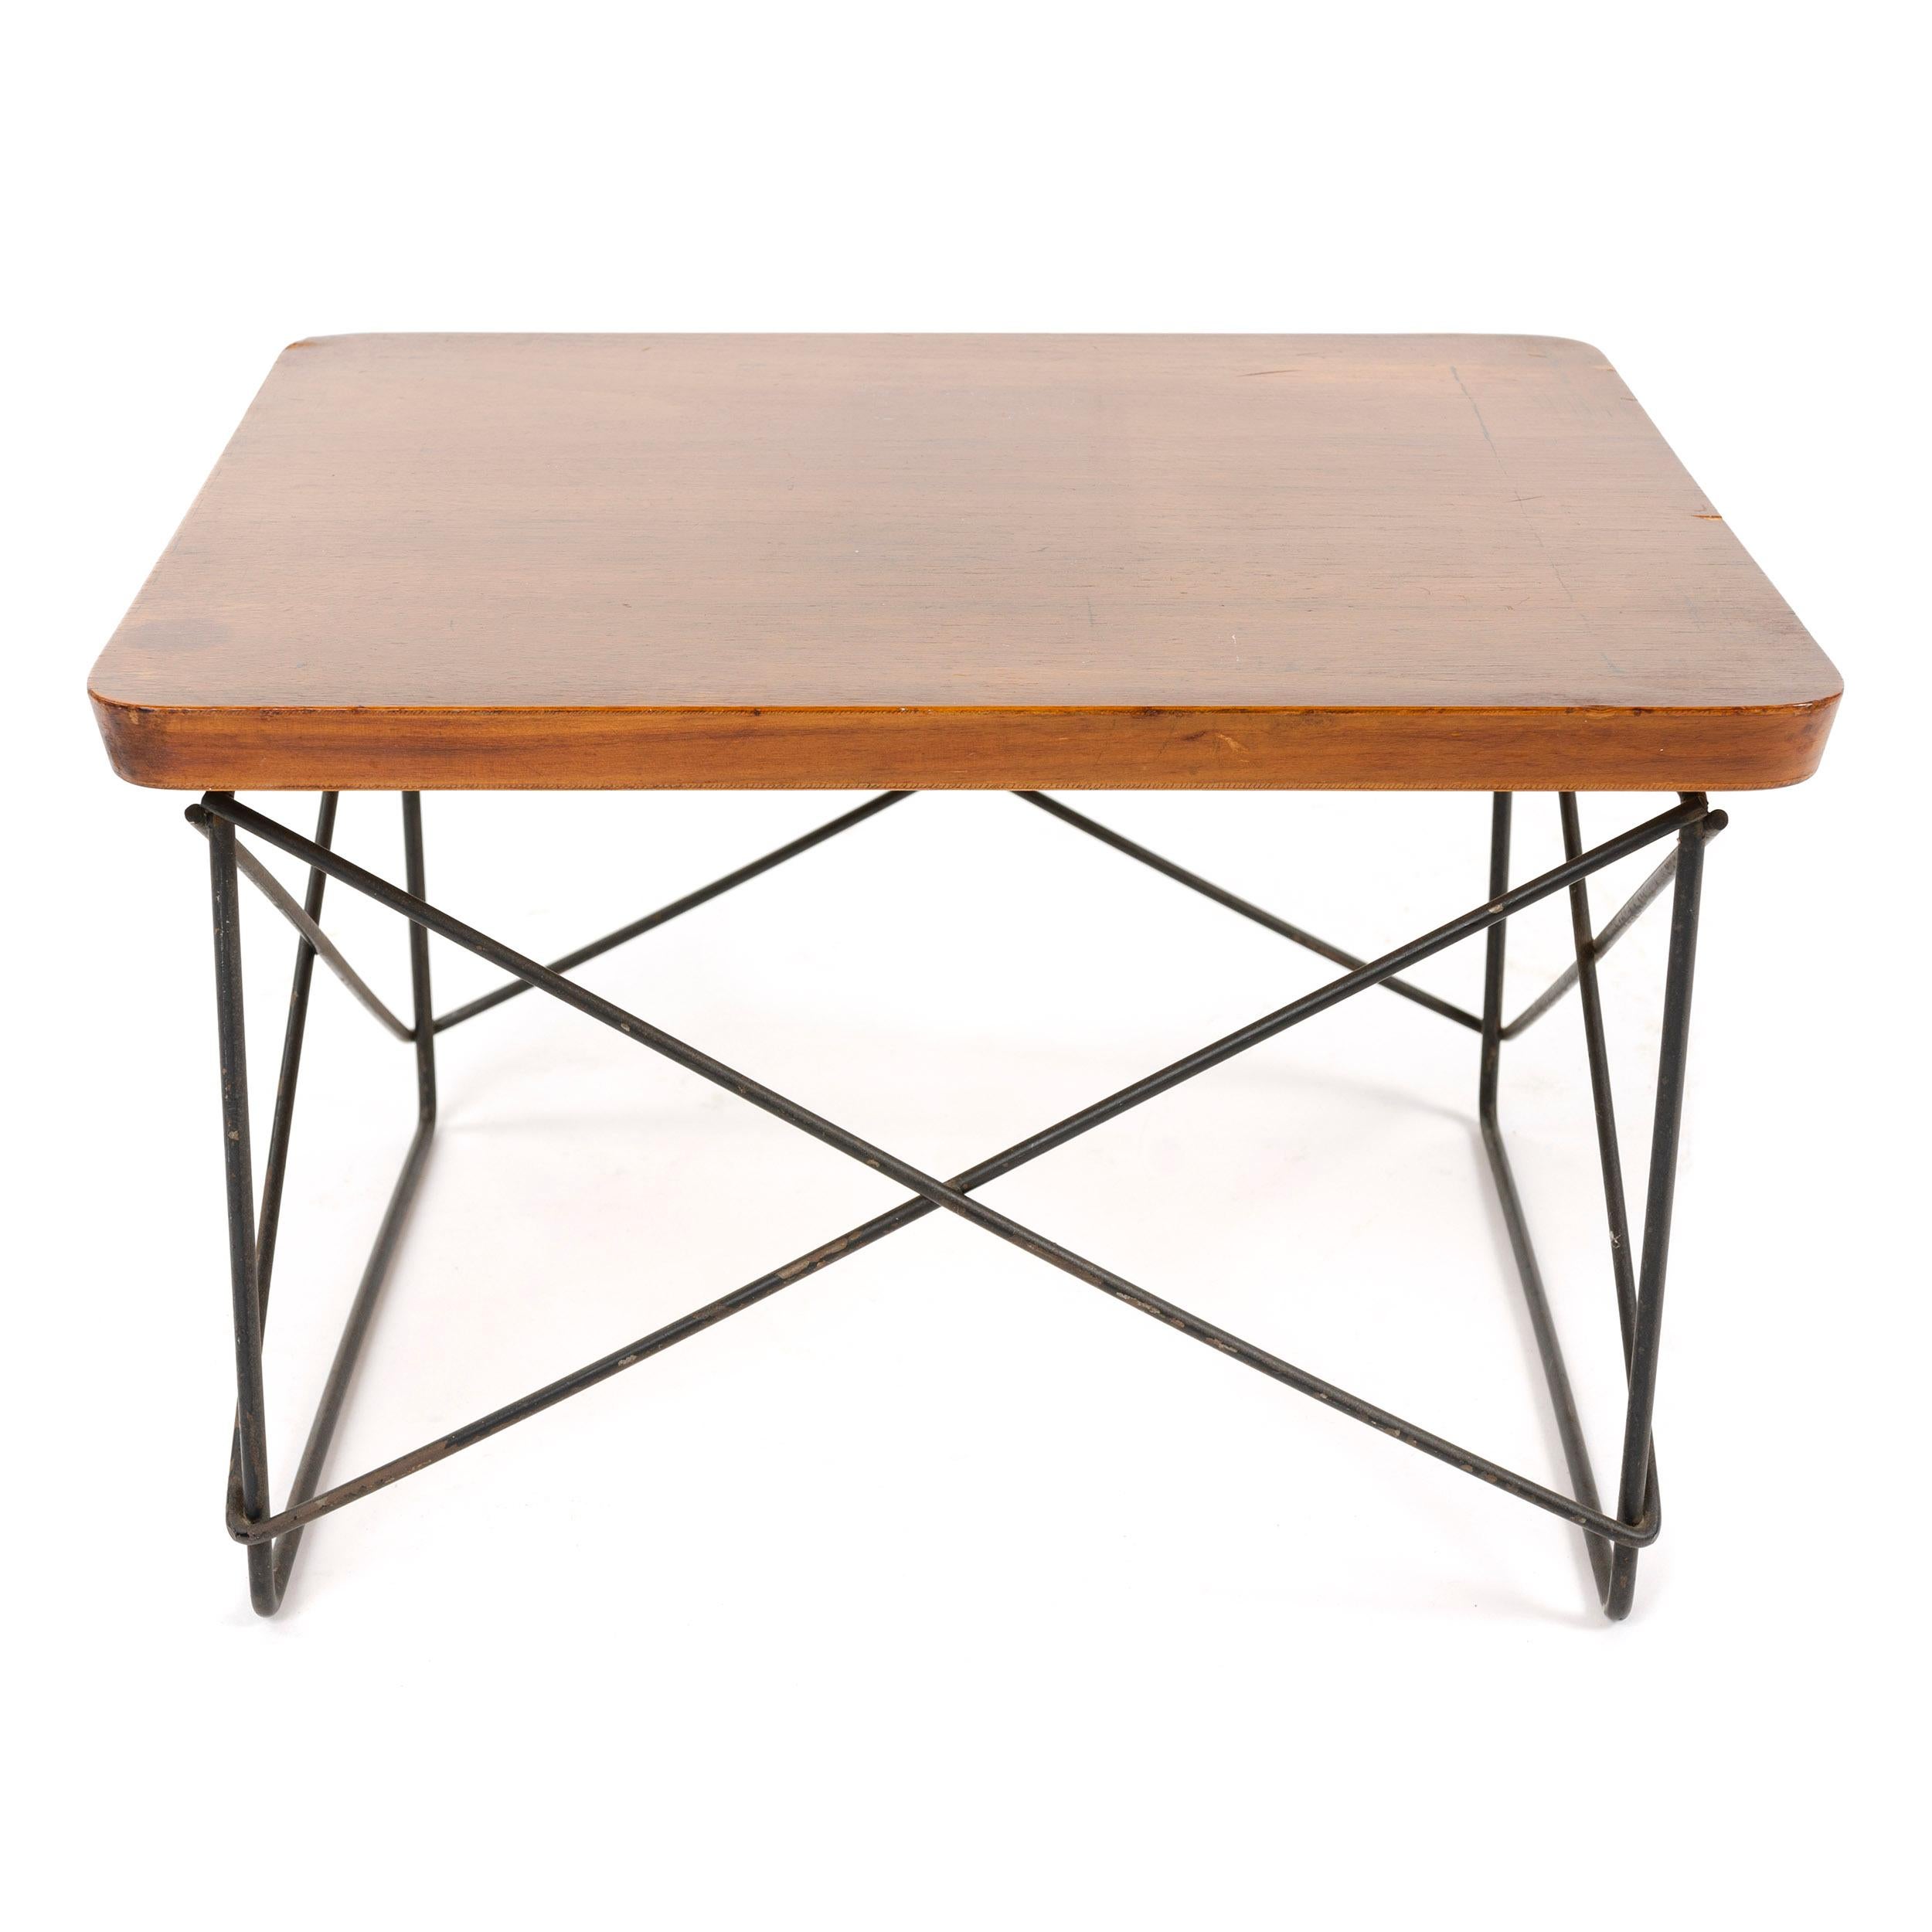 A 'LTR' (Low Table Rod) occasional table designed by Charles and Ray Eames. Laminated plywood top on a metal strut base. Made by Herman Miller in the USA, circa 1950s.